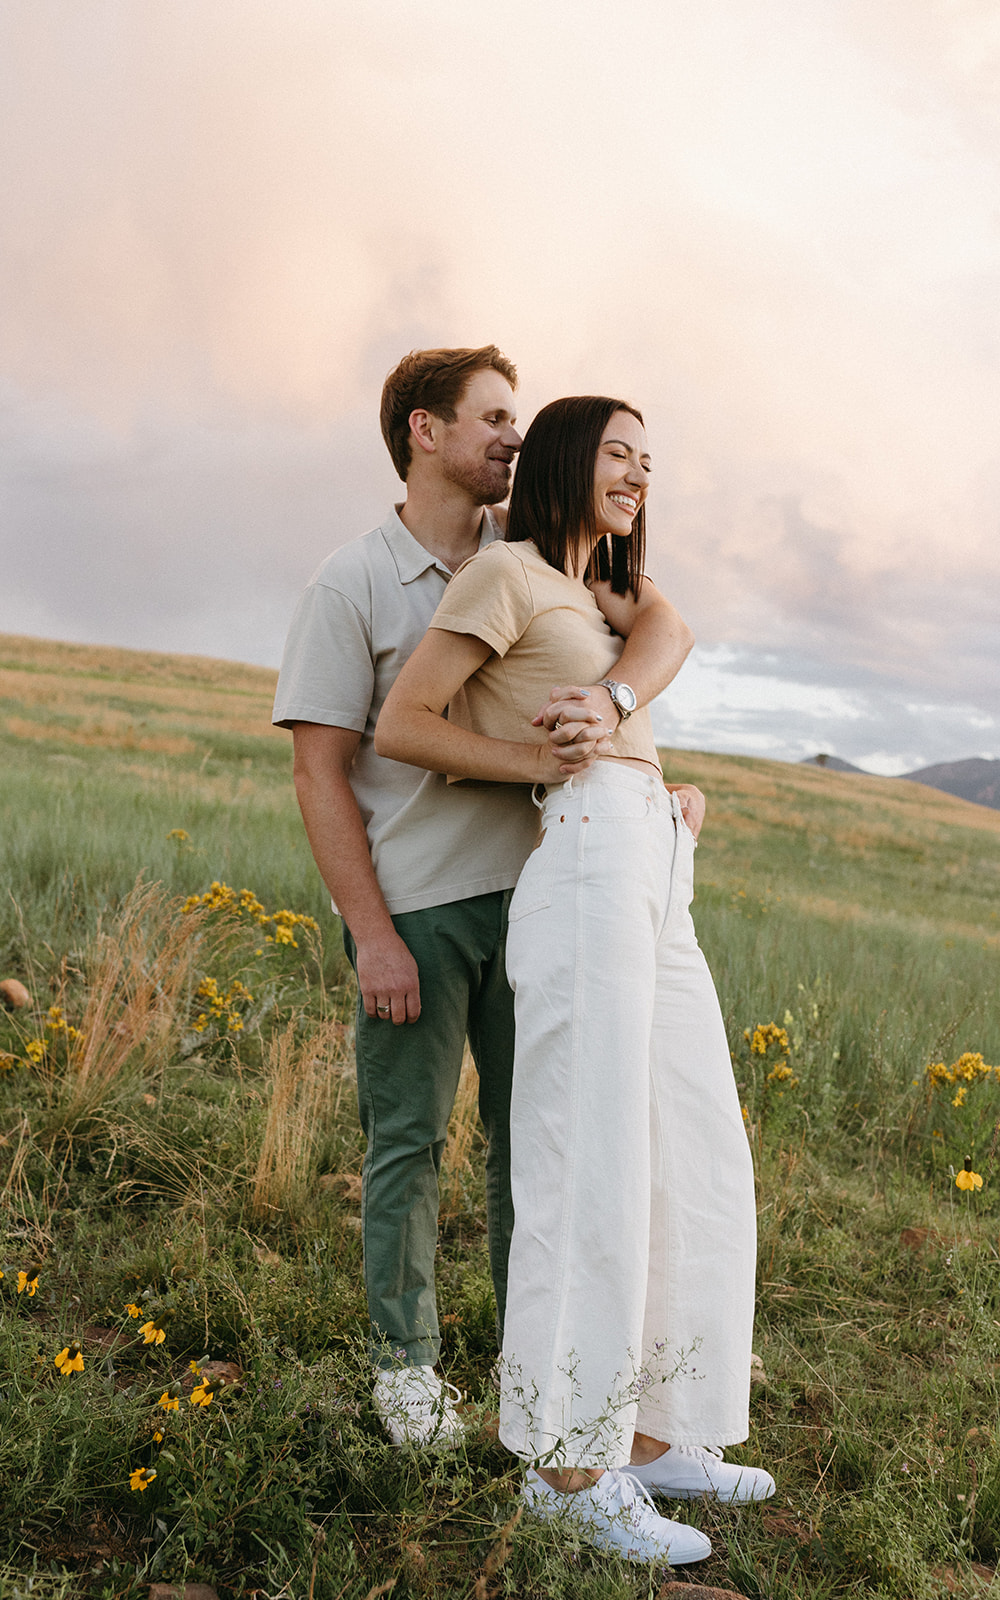 An editorial engagement couple embraces while surrounded by natural scenery in the Colorado Rockies